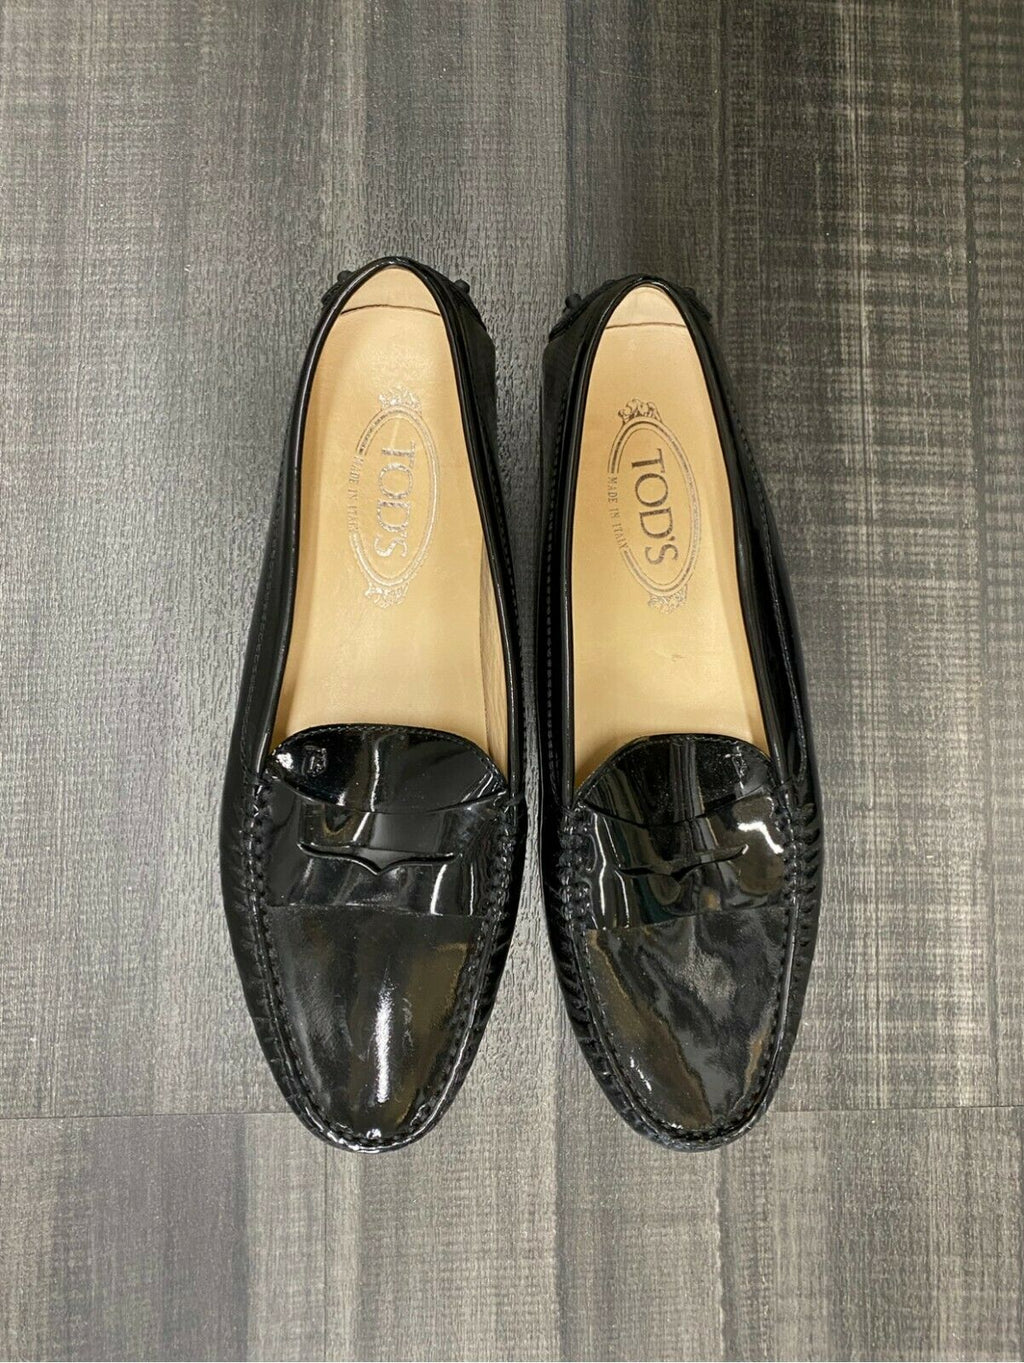 Gommino Black Patent Leather Driving Loafers